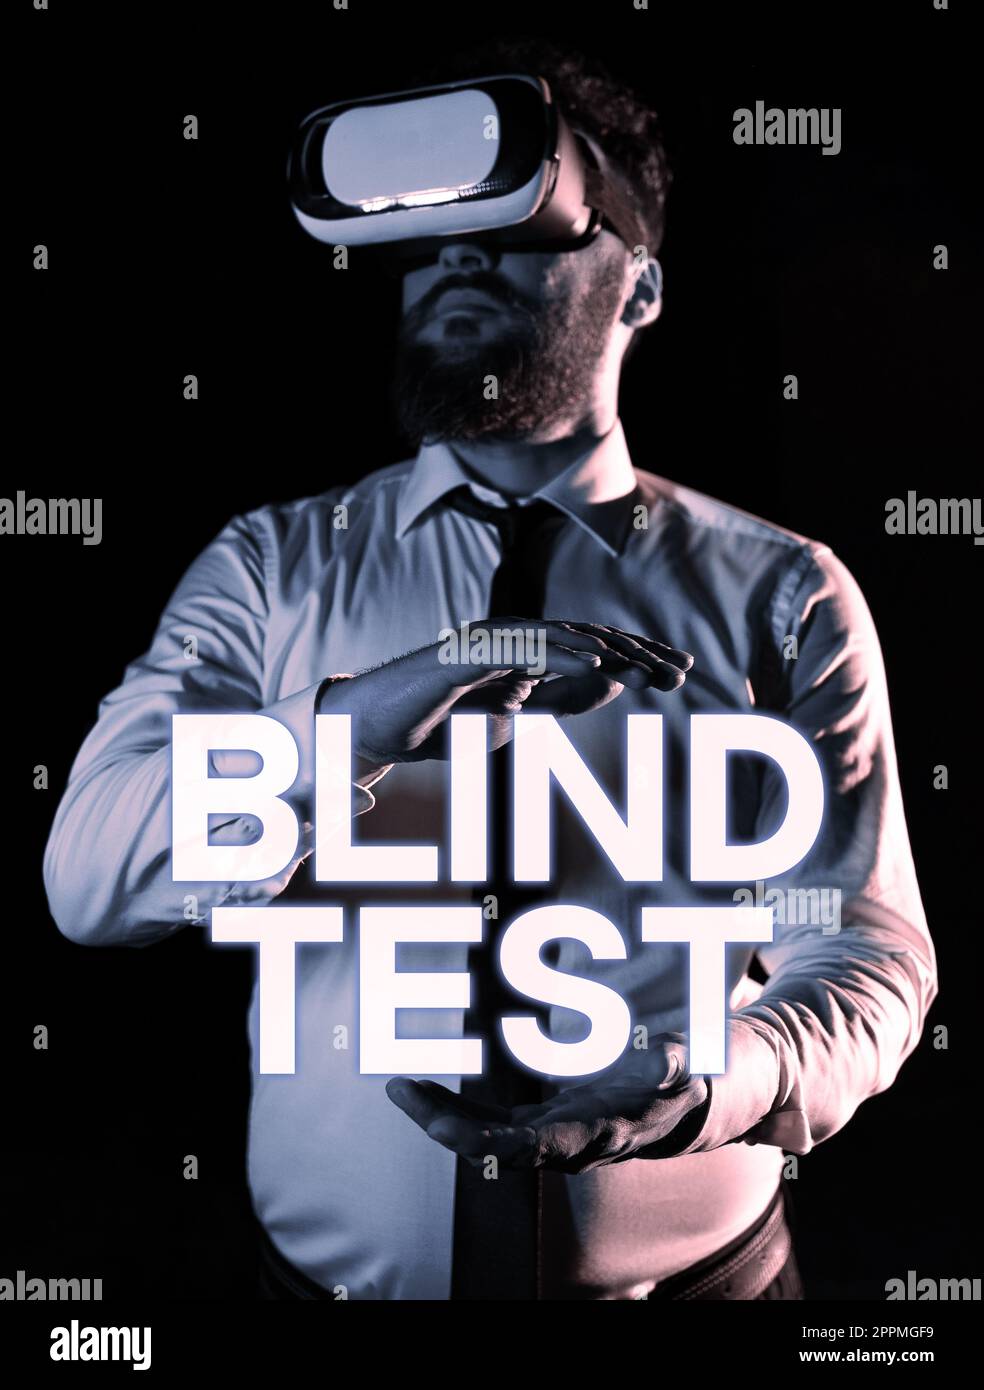 Sign displaying Blind Test. Business concept Social engagement with a person one has not previously met Stock Photo